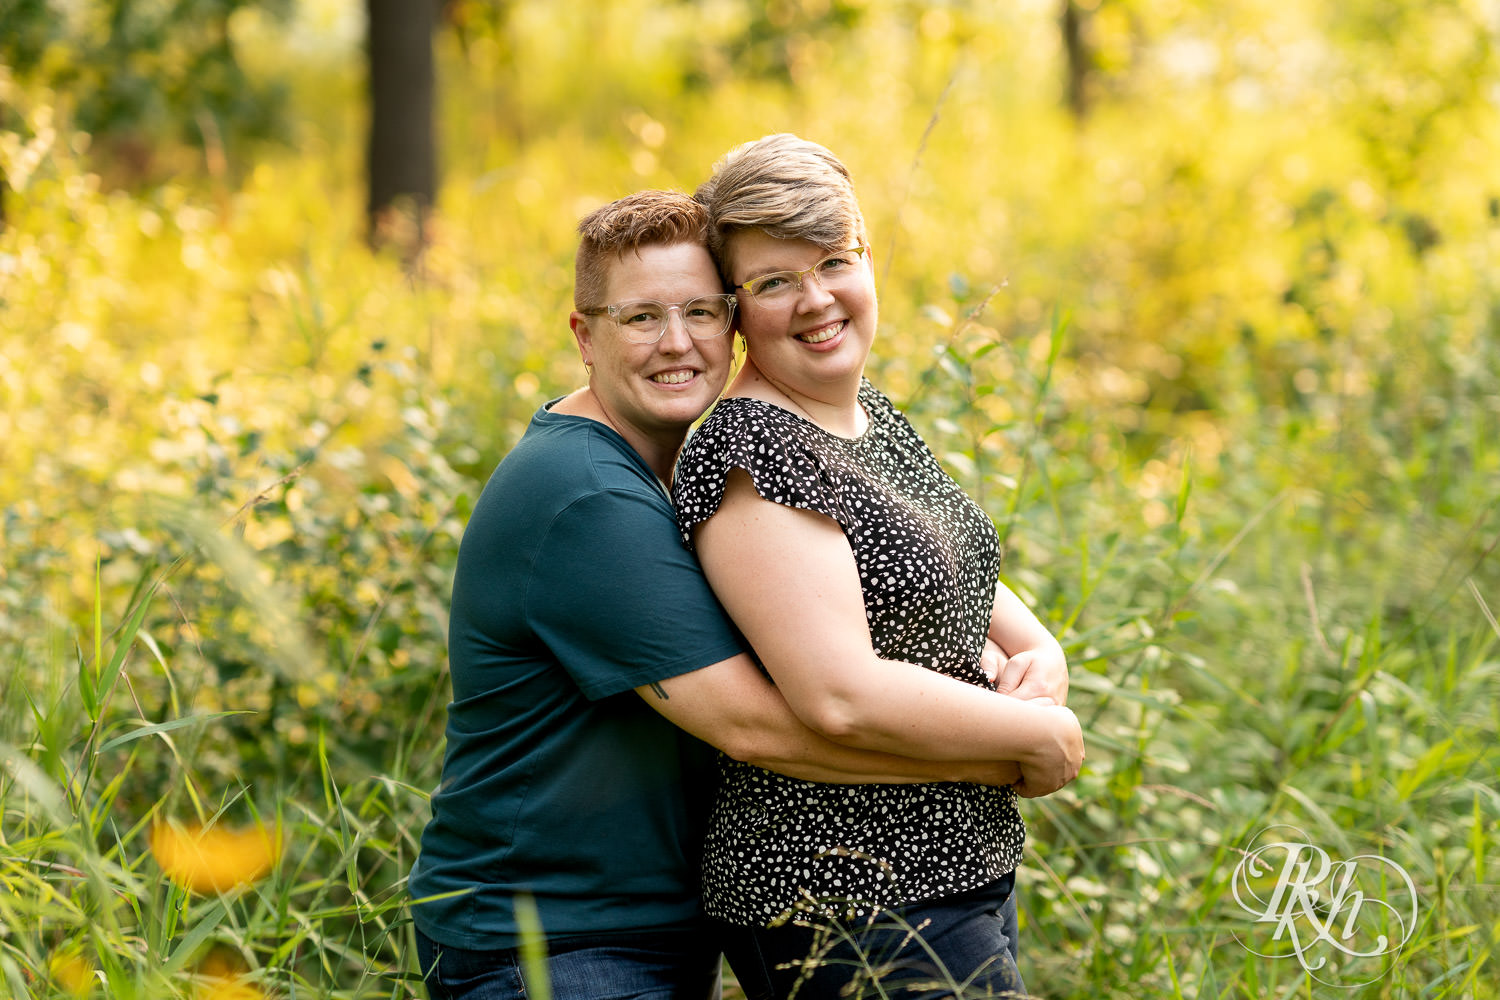 Lesbian couple smile and kiss during engagement photos at Lebanon Hills Regional Park in Eagan, Minnesota.